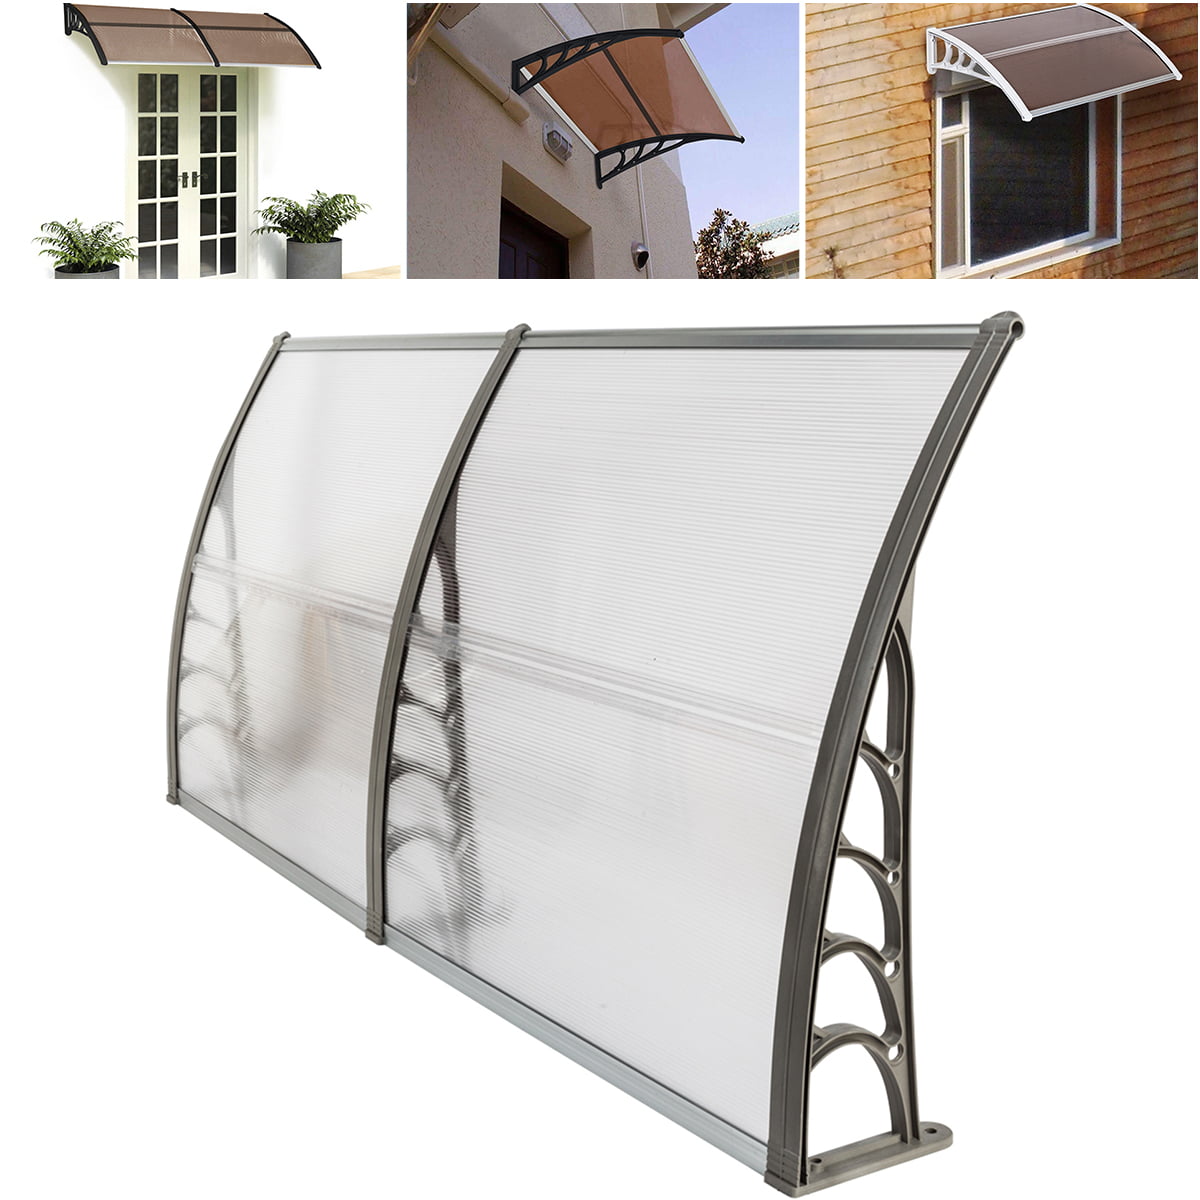 40 x 120, White Canopy/Gray Bracket Polycarbonate Cover Front Door Outdoor Patio Awning Canopy UV Rain Snow Protection Hollow Sheet Patio Door Window Awning Canopy 